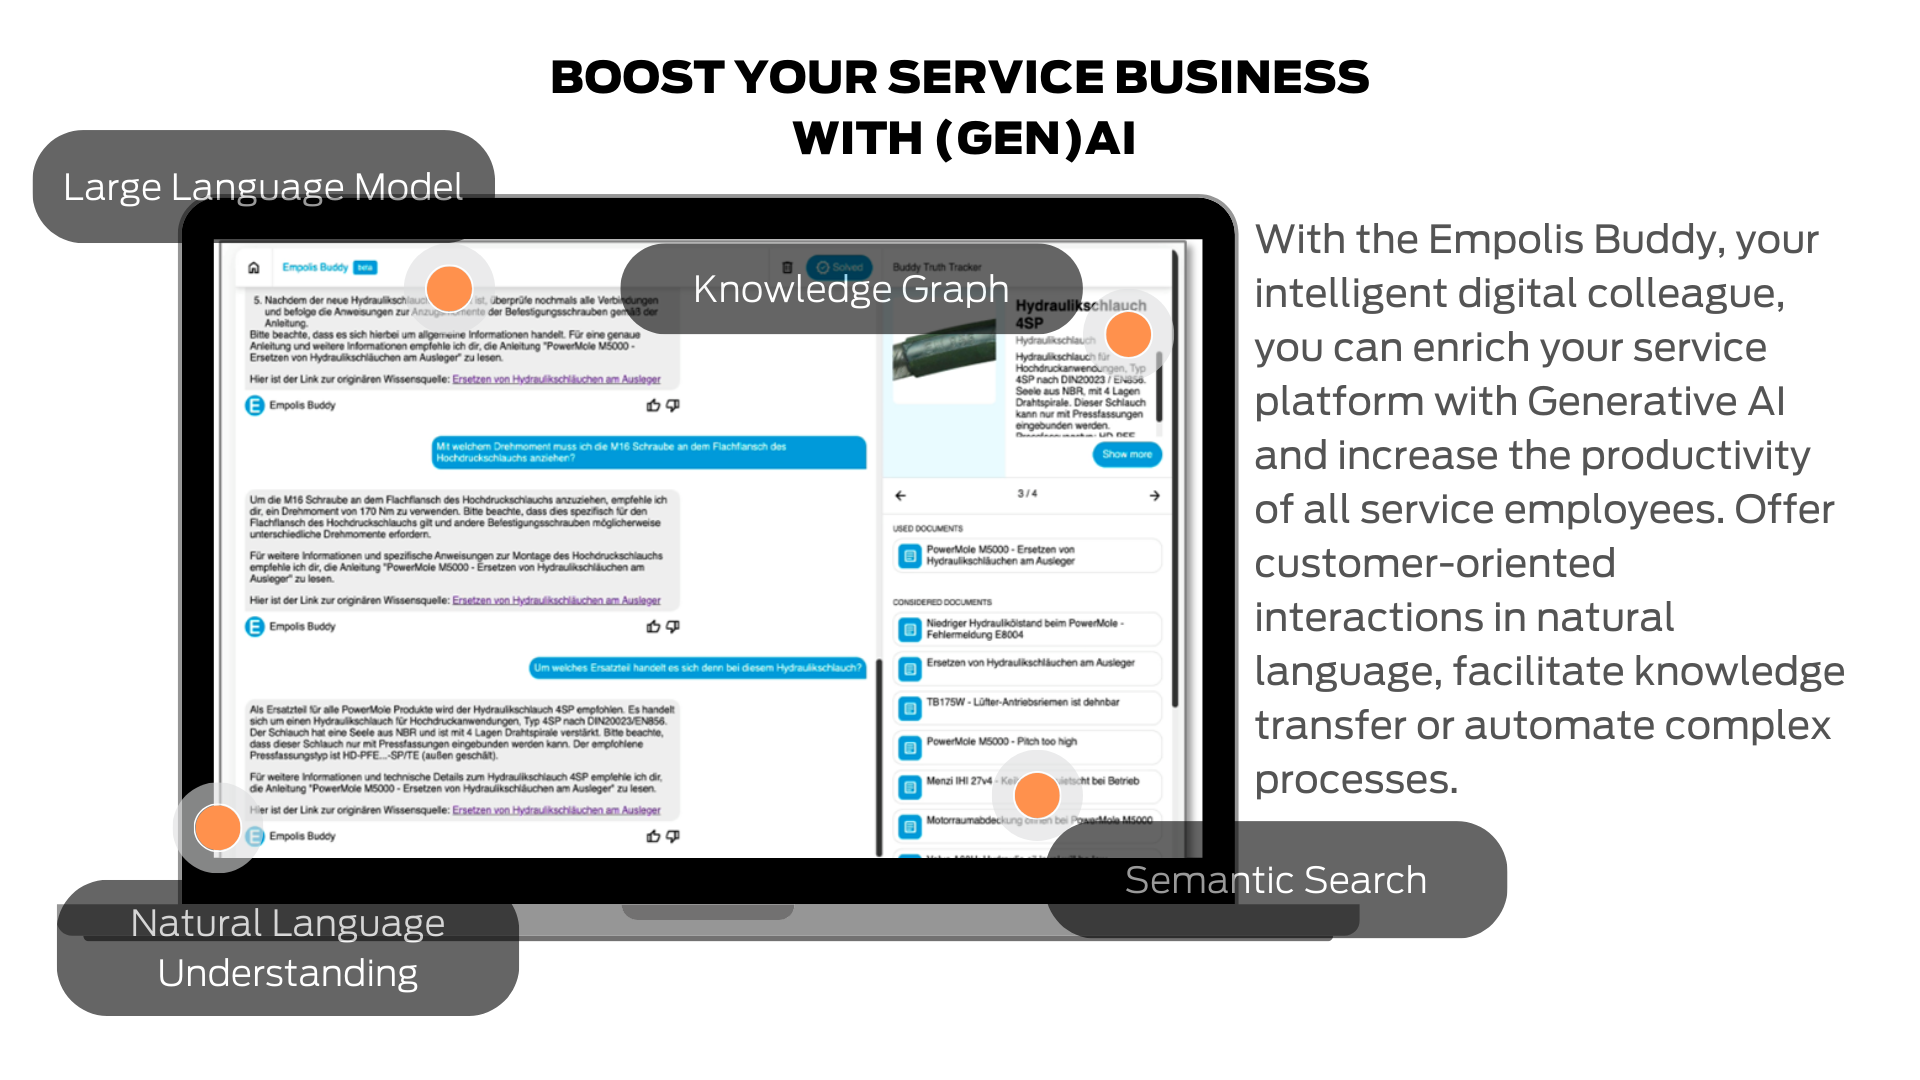 Boost your service business with GenAI